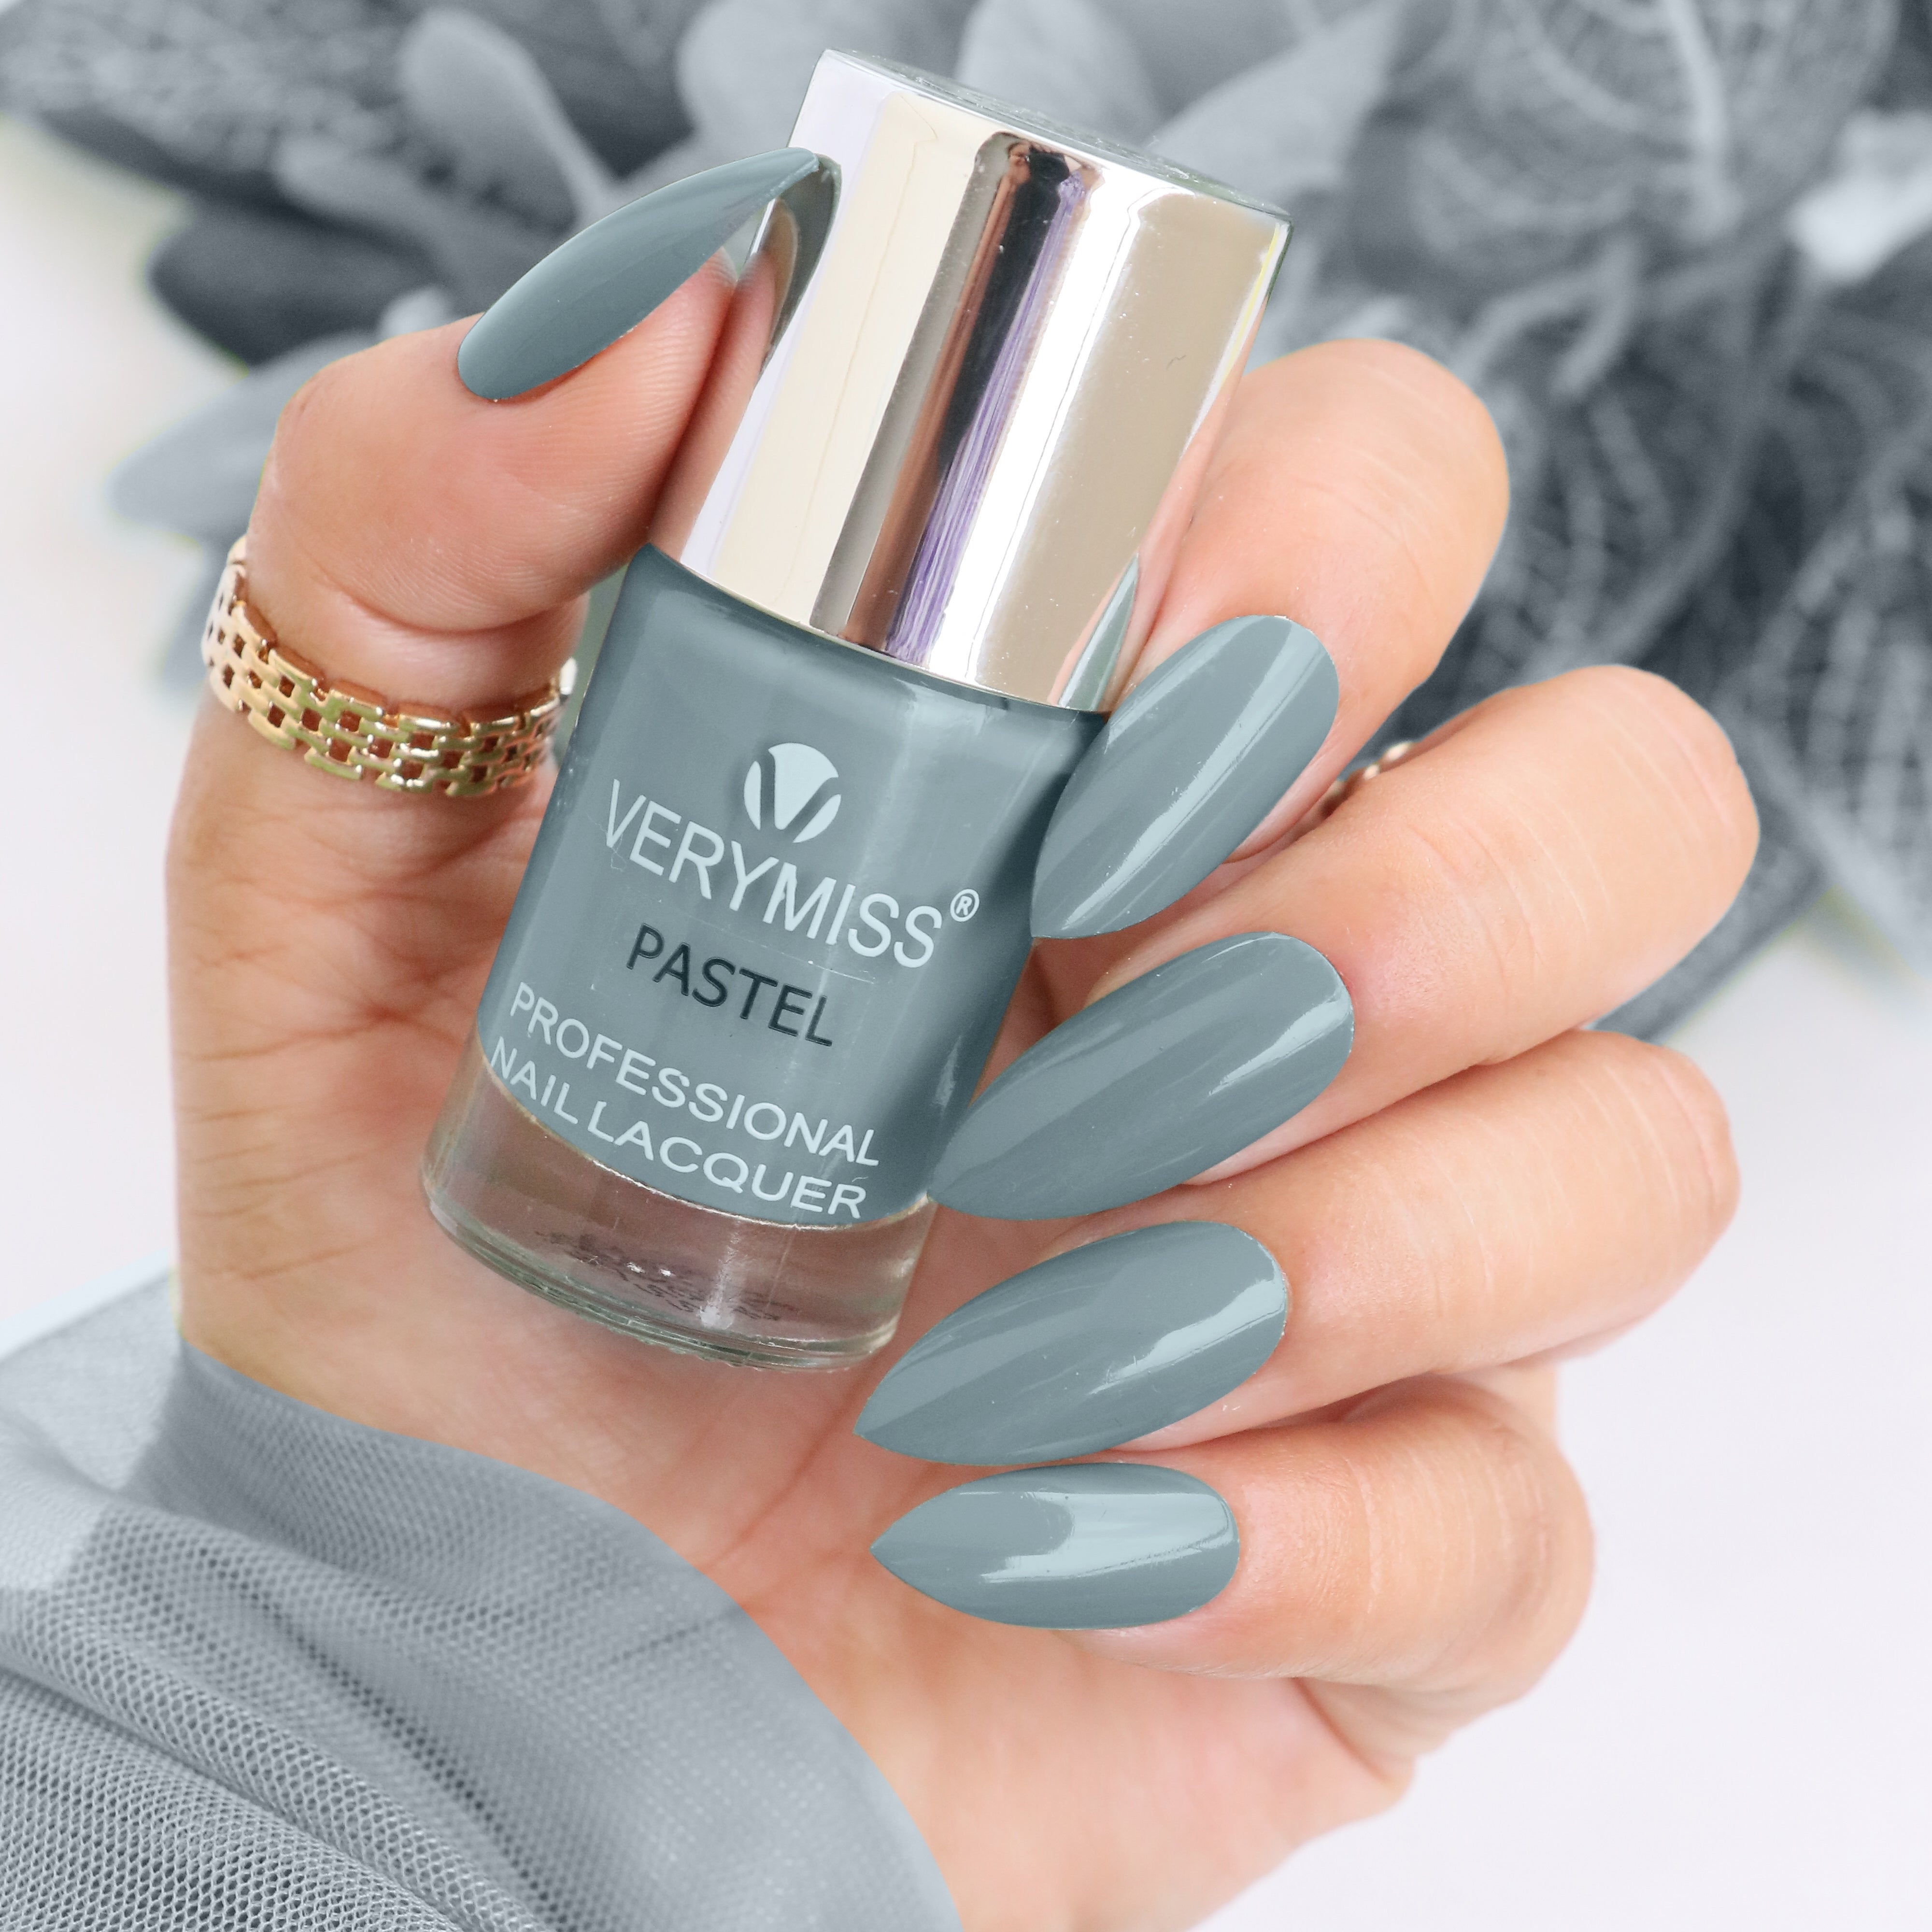 Buy MI FASHION High Shine & Plump Finish Nail Polish Grey Pack  (Long-Lasting-6 Days) Glossy For A Pro Look Top Coat 12ml Bottle (Set-1)  Online at Low Prices in India - Amazon.in